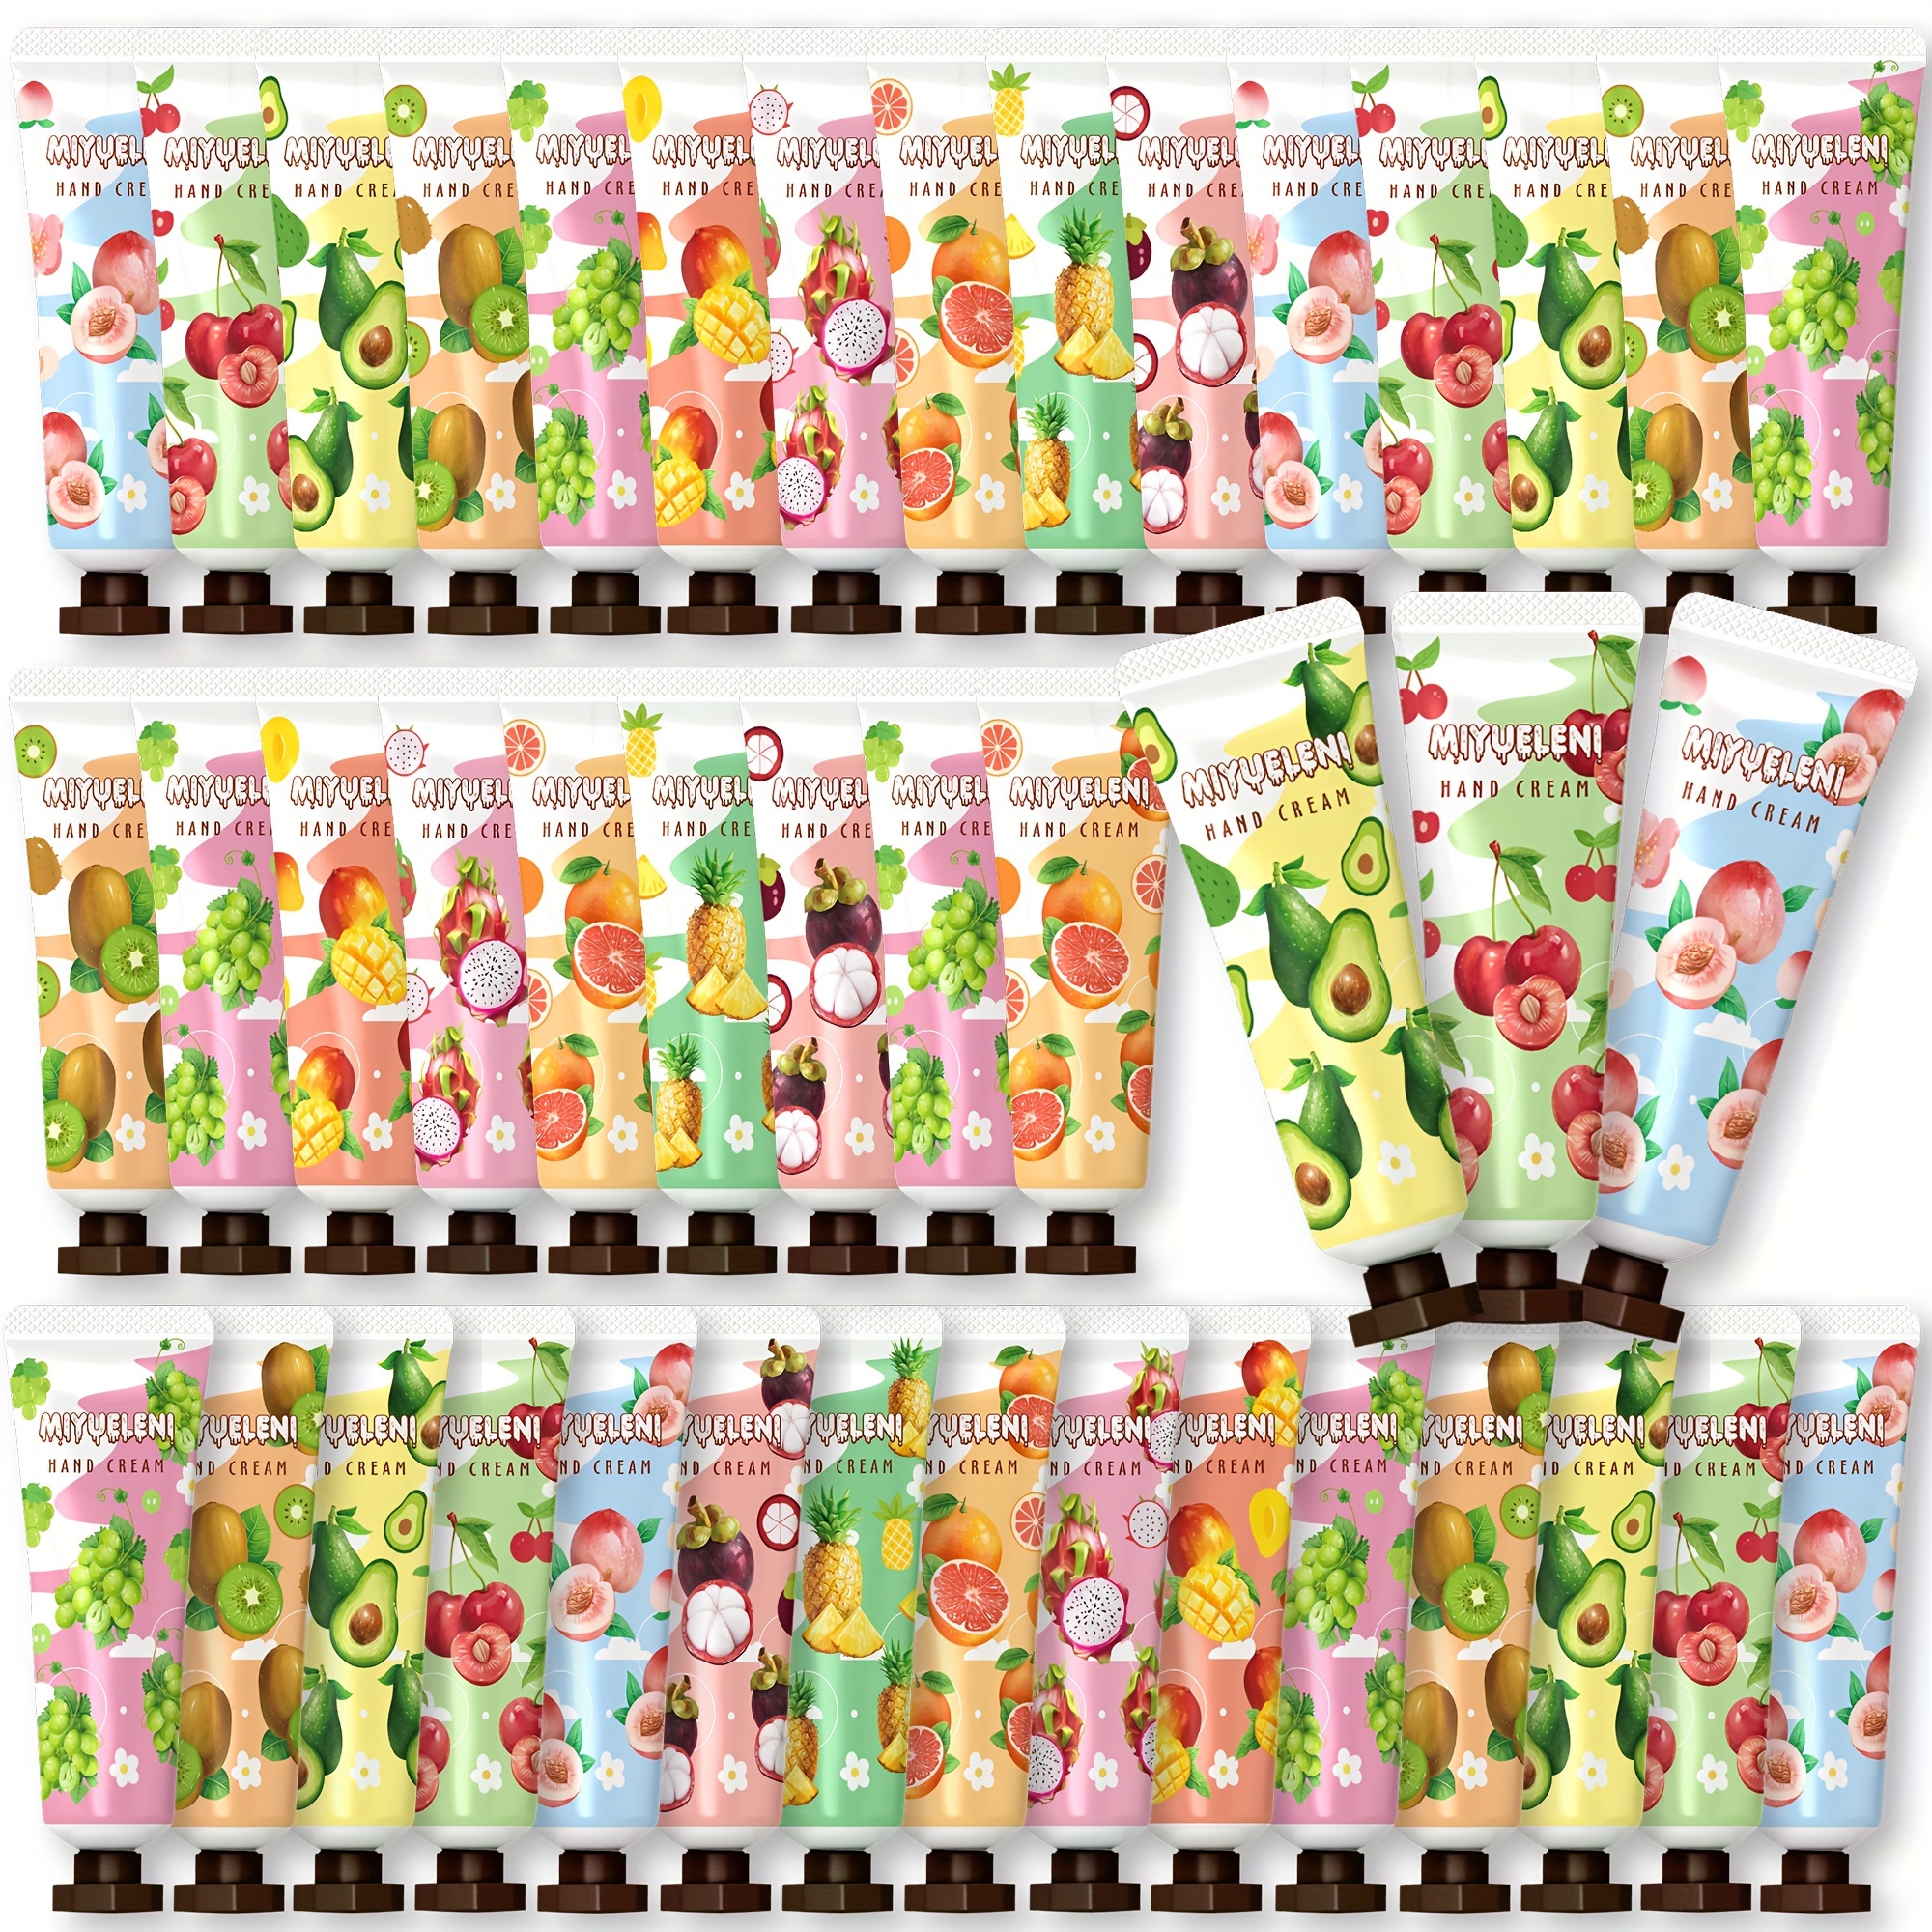 

24-piece Plant & Fruit Hand Cream Gift Set - Deep Moisturizing, Nourishing Travel Size Lotion For Dry, Cracked Hands - -free With Vitamin E & Glycerin, Perfect For All Skin Types